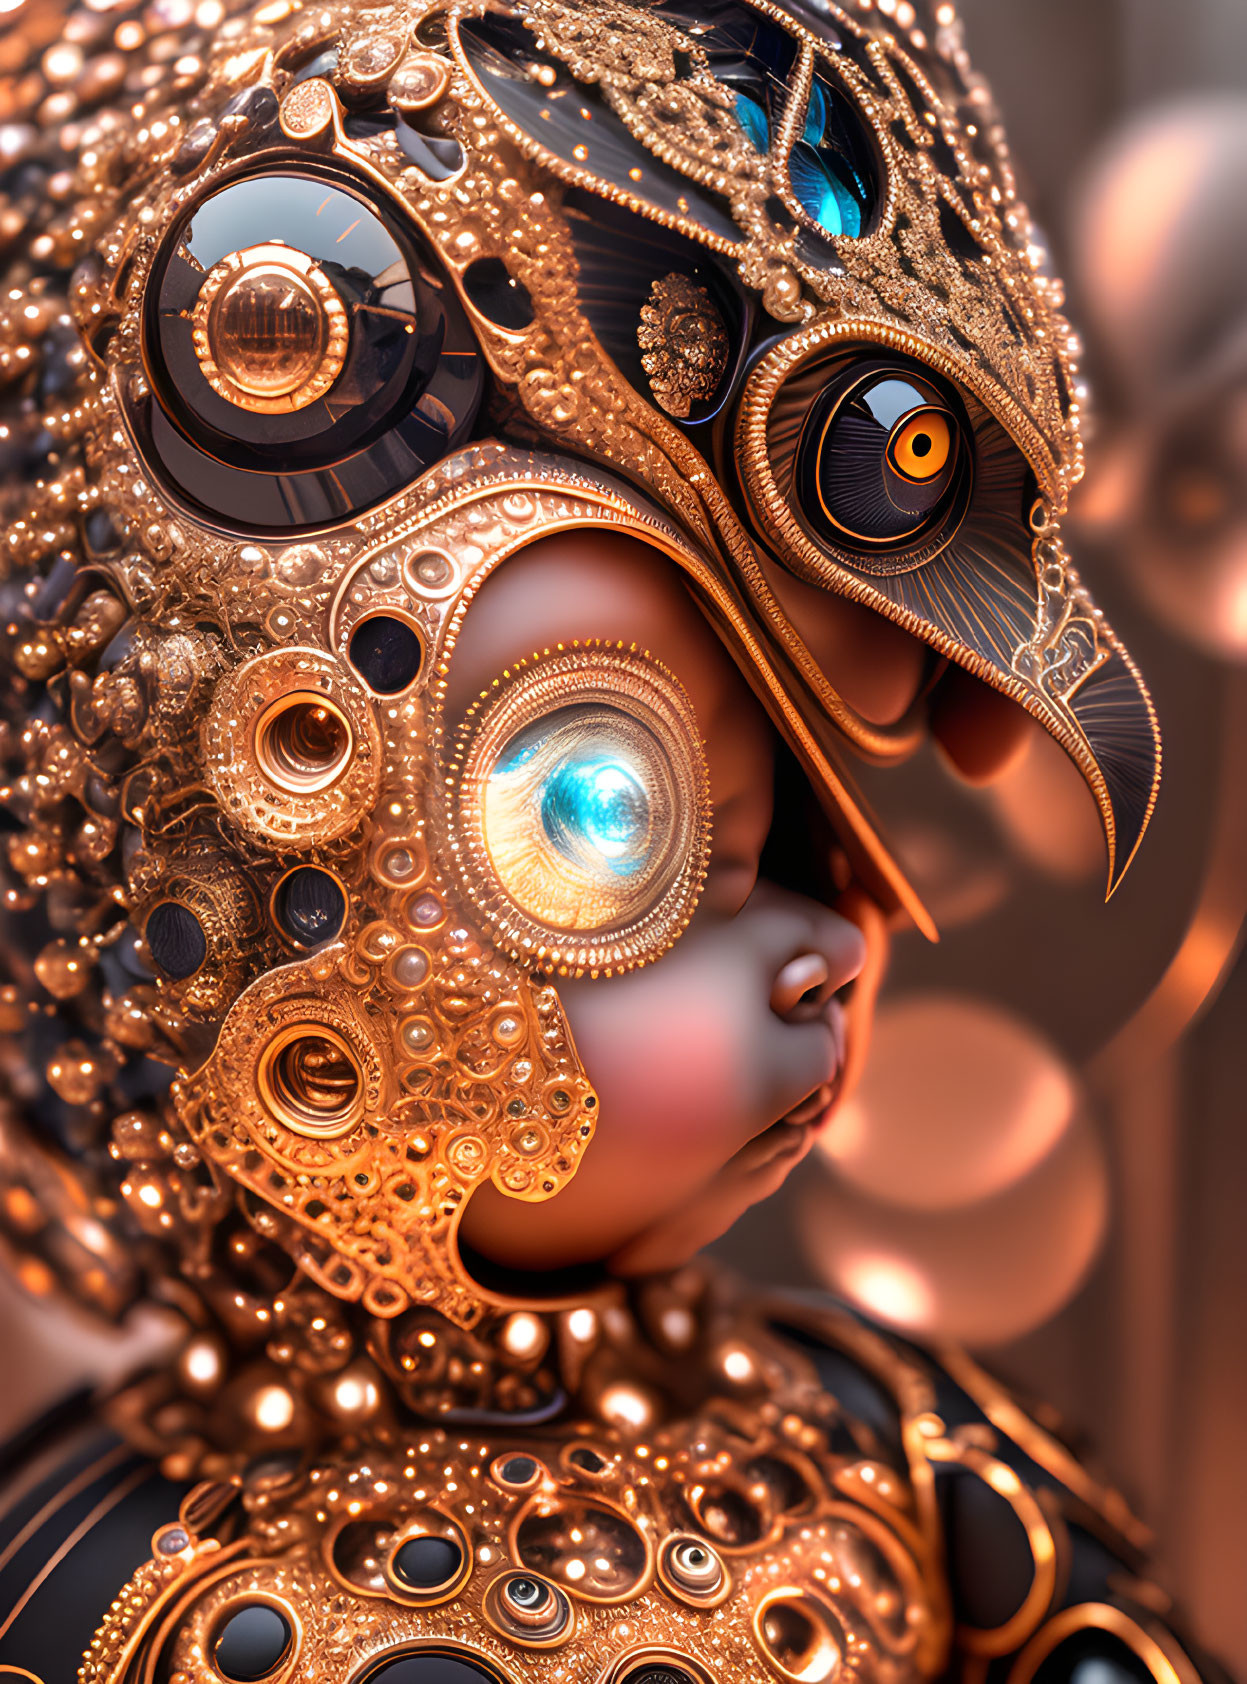 Intricate golden gears and jewel-like details on mechanical figure